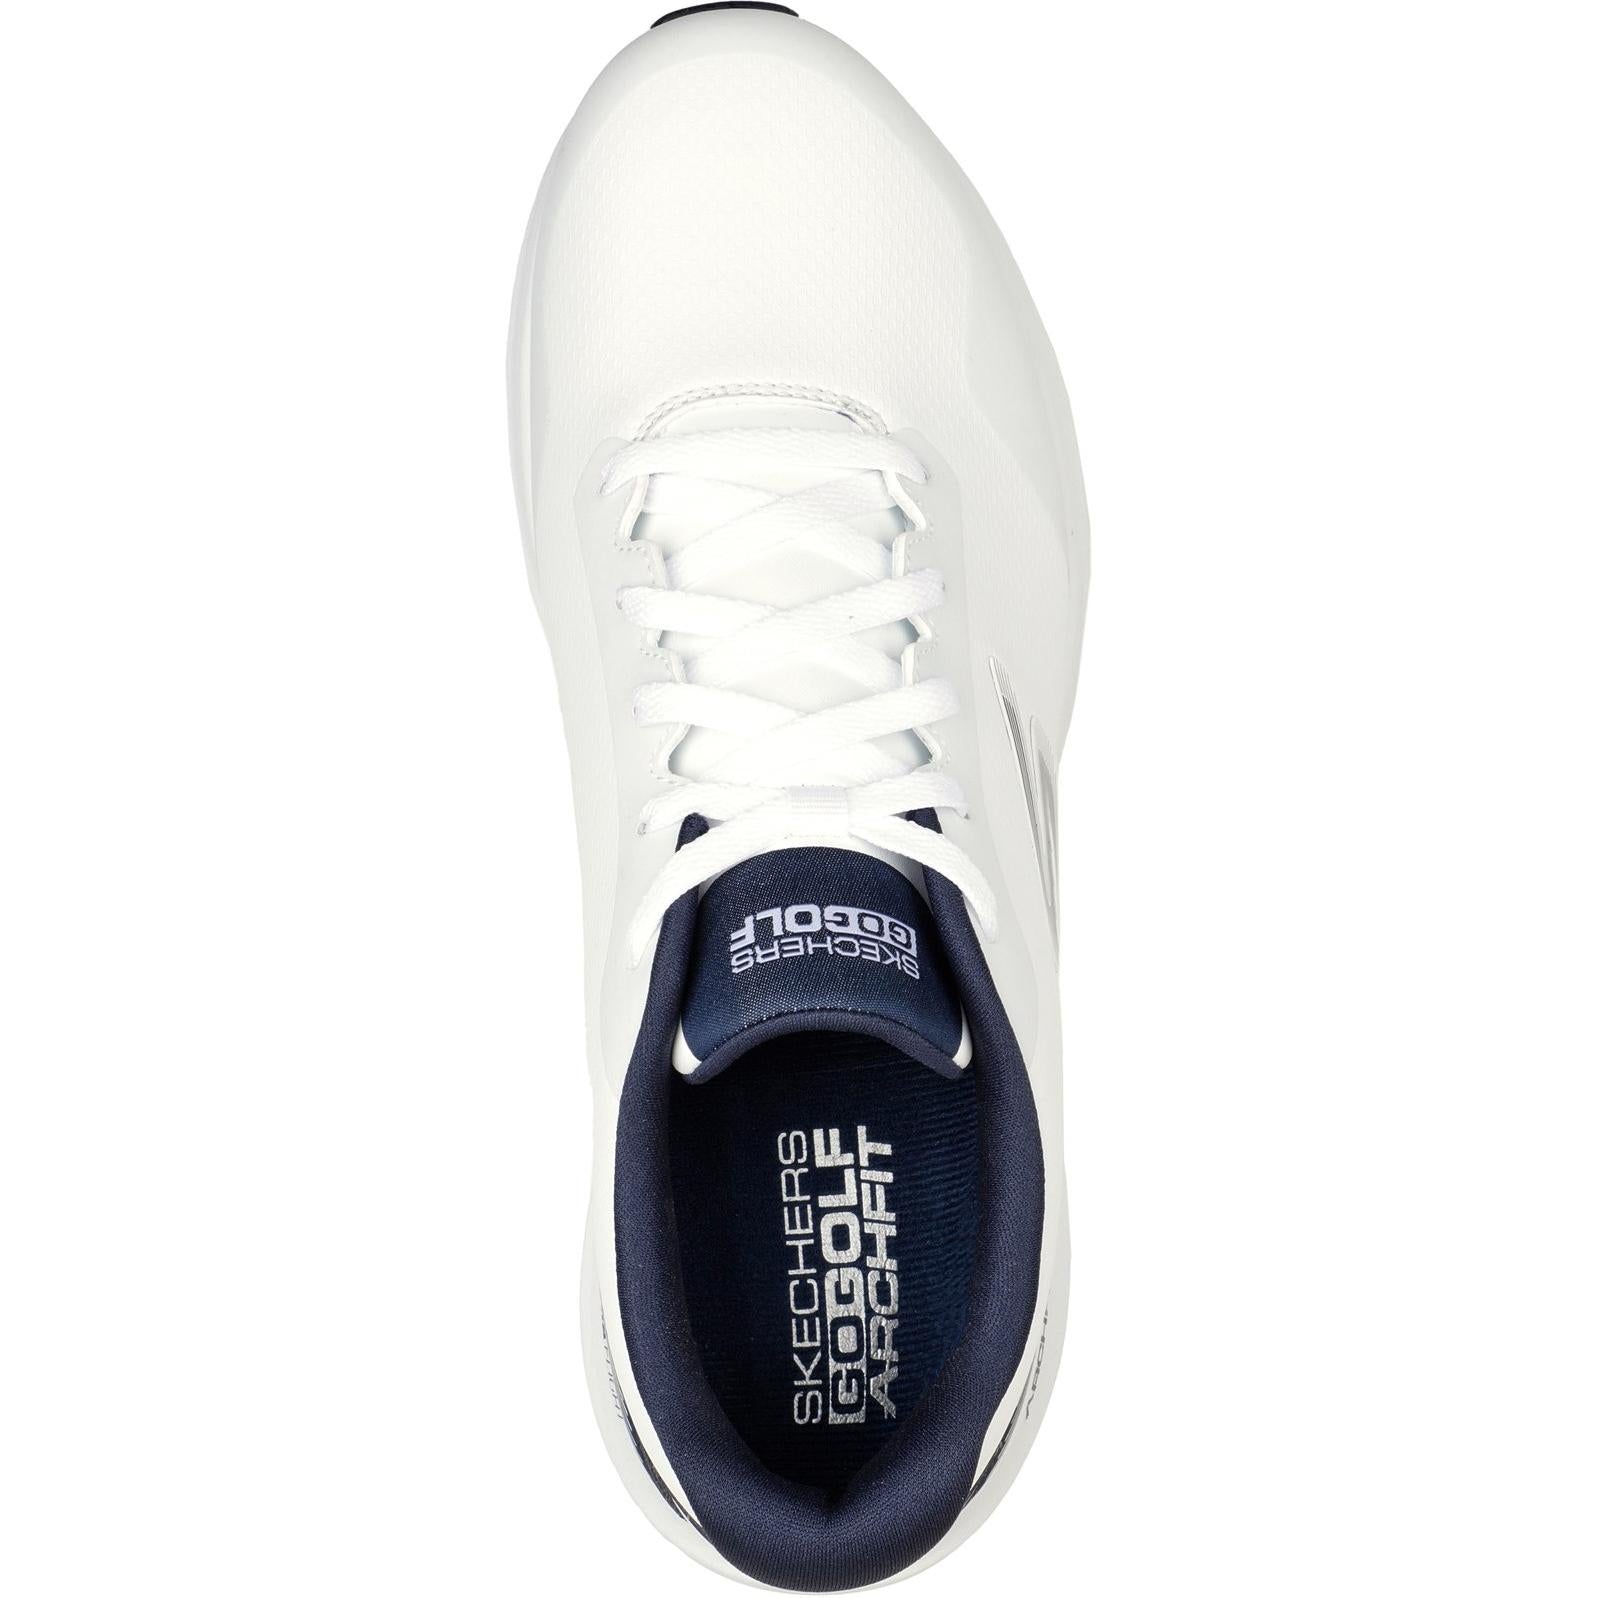 Skechers Go Golf Max 2 Golf Shoes